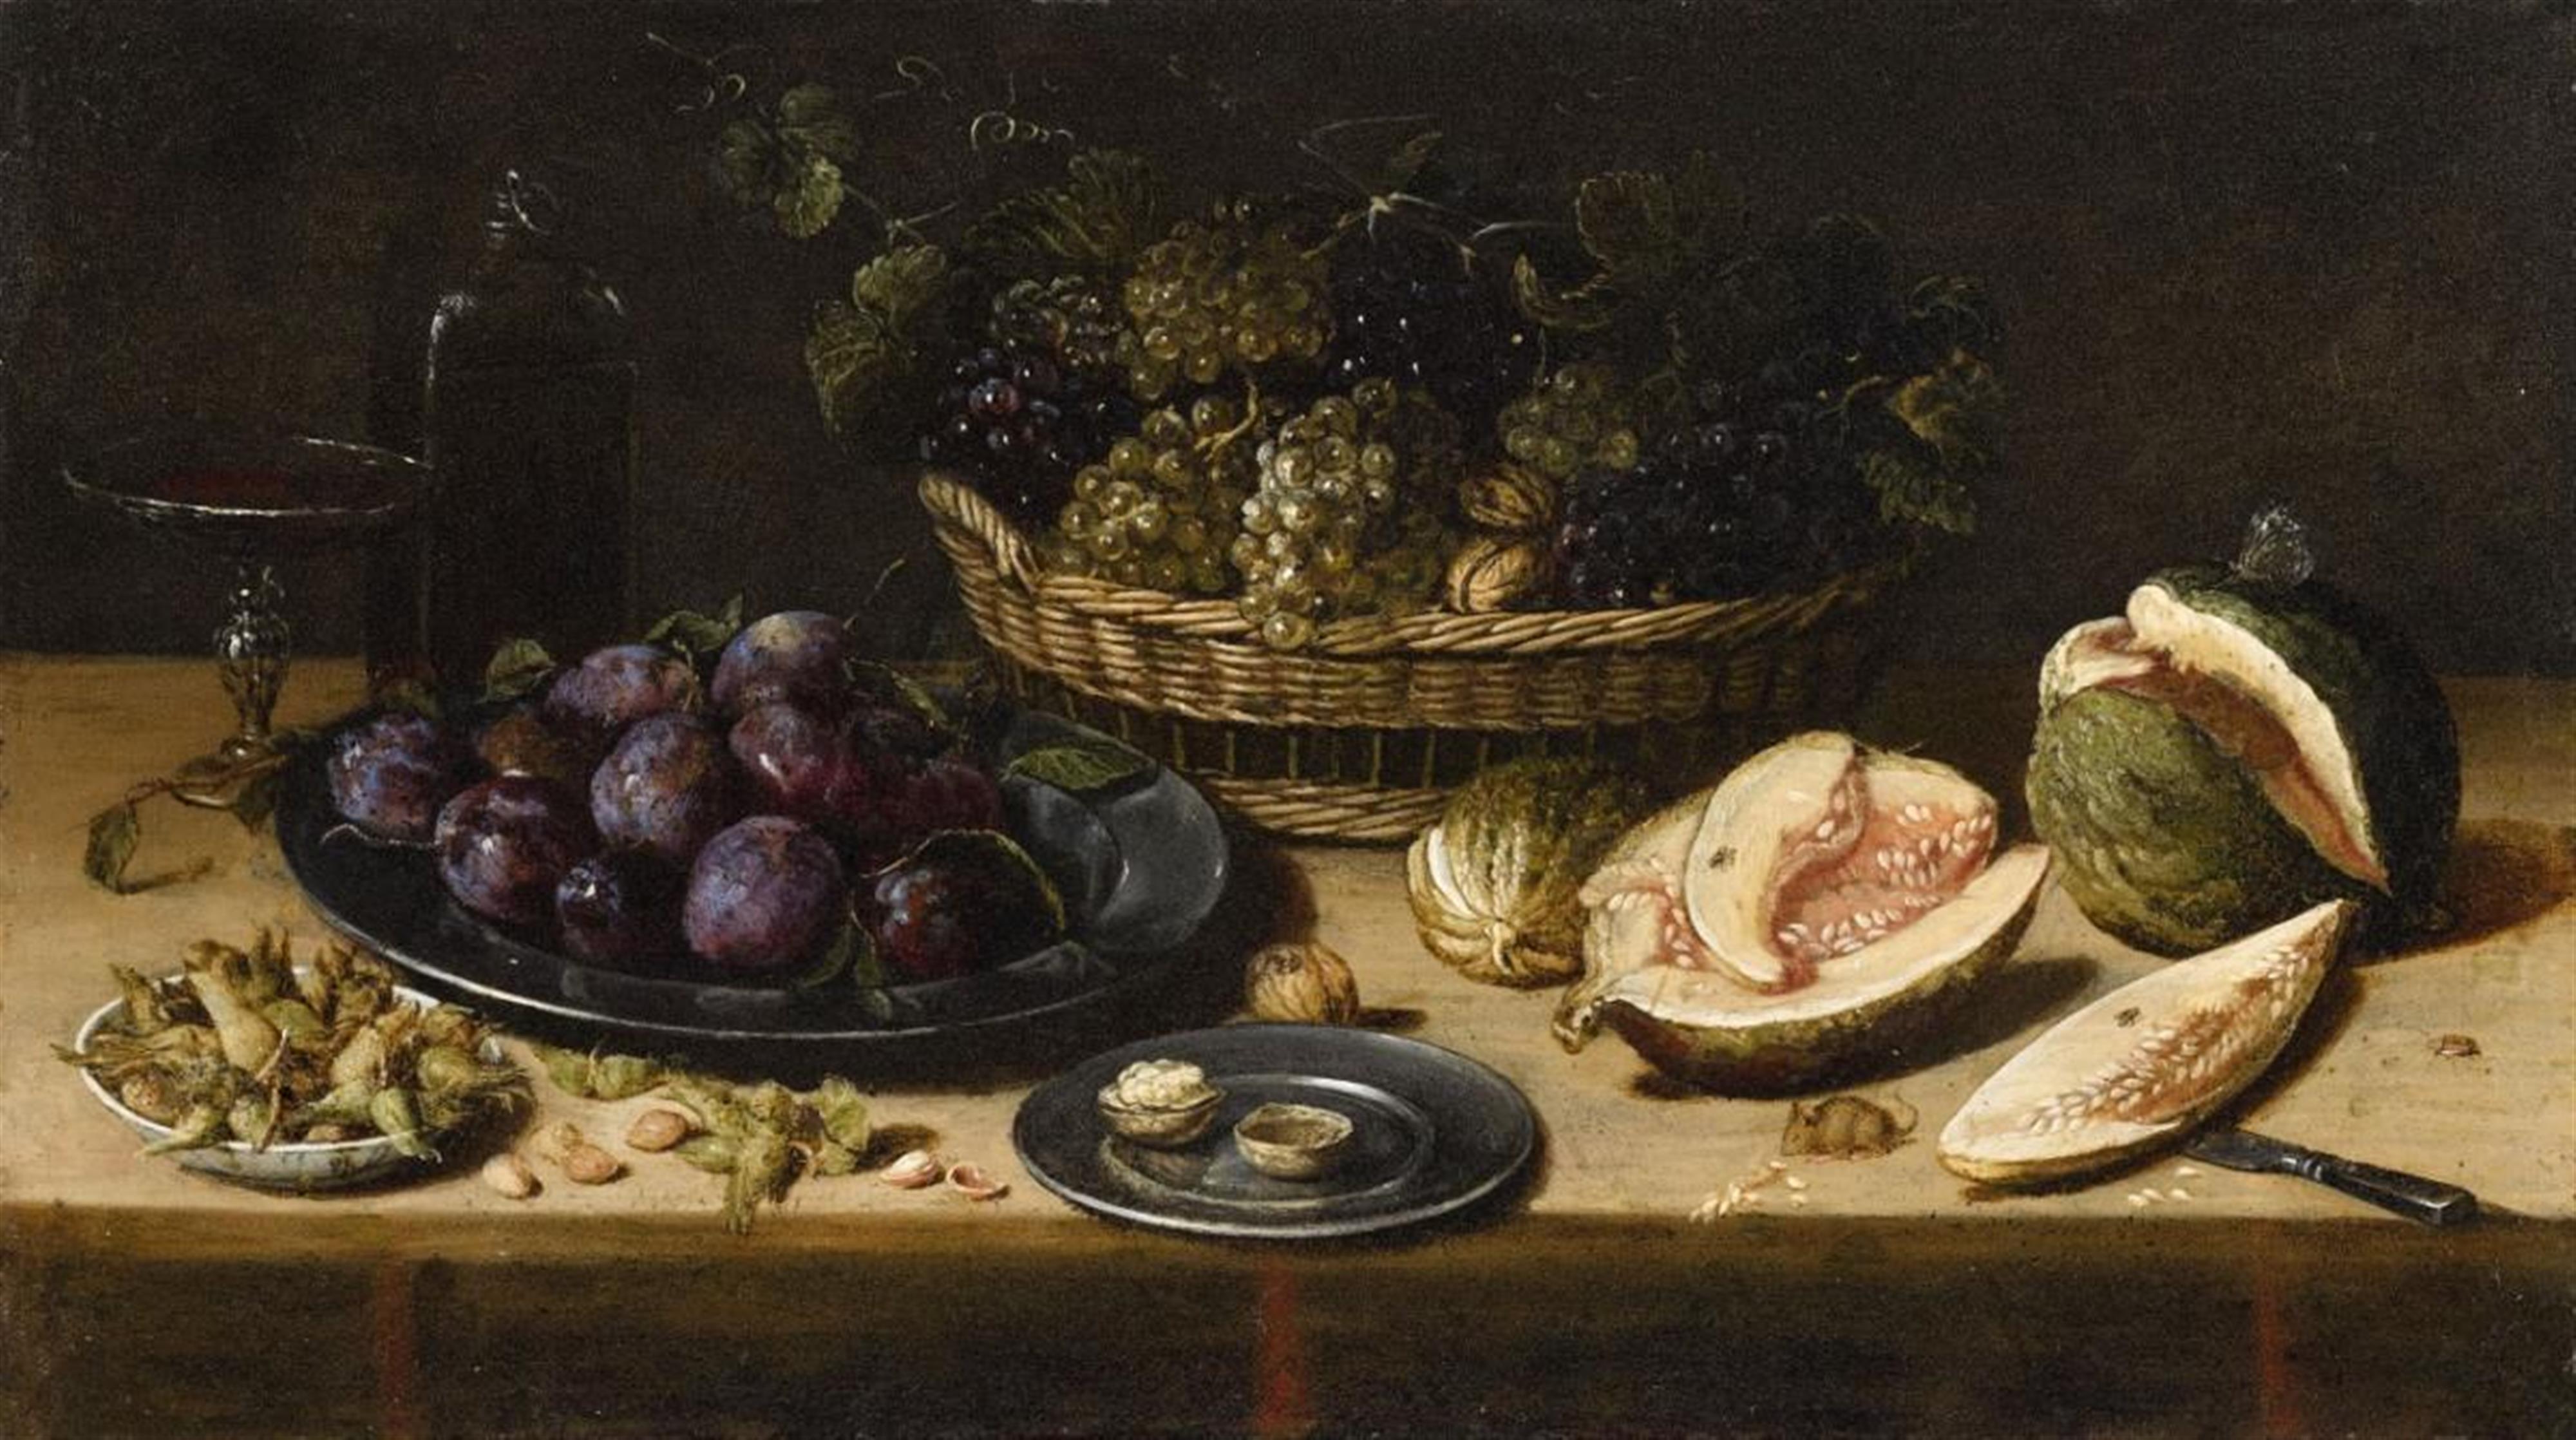 J. van Kessel - Still Life with Plums, Hazelnuts, Grapes and Melons - image-1